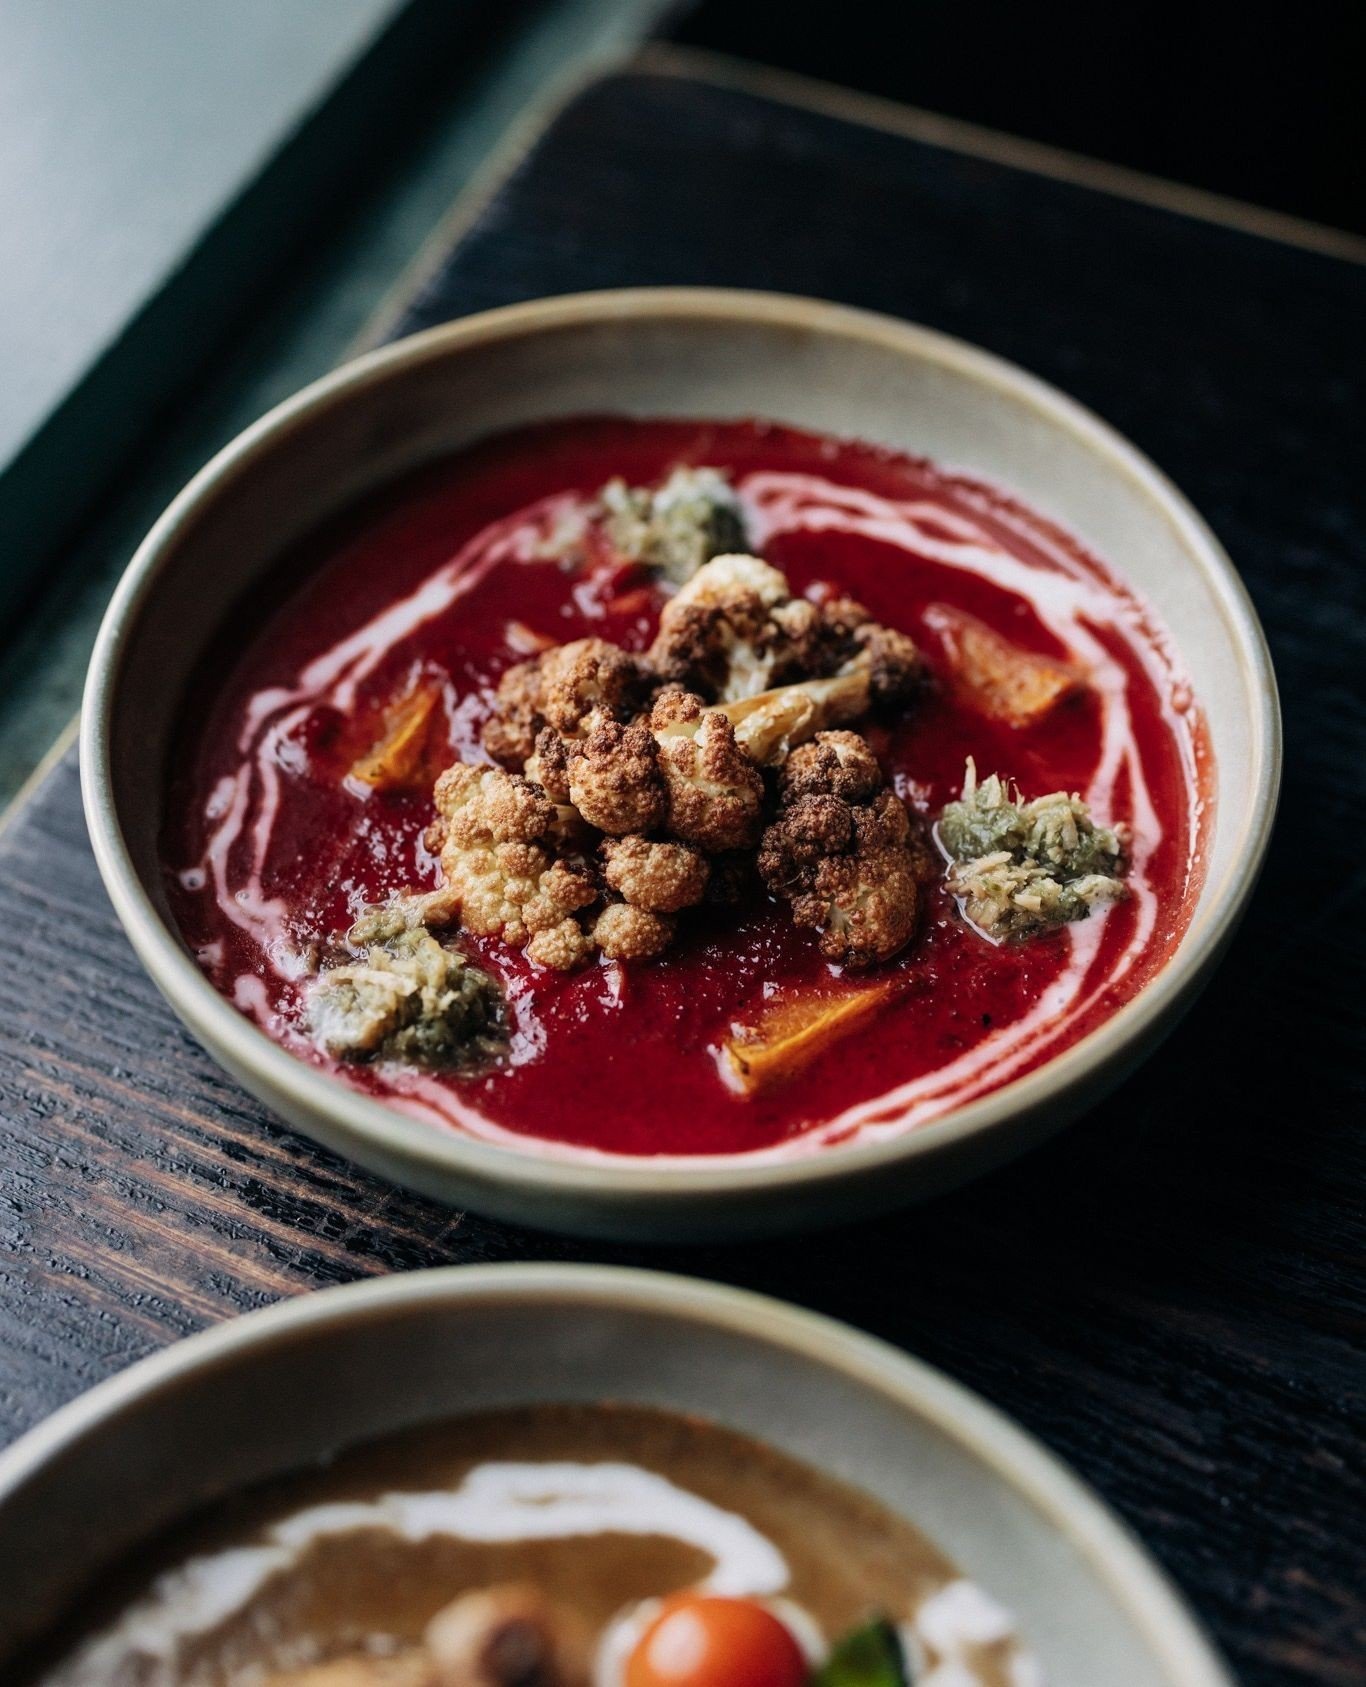 Add a little vibrance to your table with our Beetroot &amp; Cashew Curry! A Sri Lankan style curry with coconut, cauliflower and green chilli sambal. Book your table online to give it a try! 🔥 #gingermegsx⁠